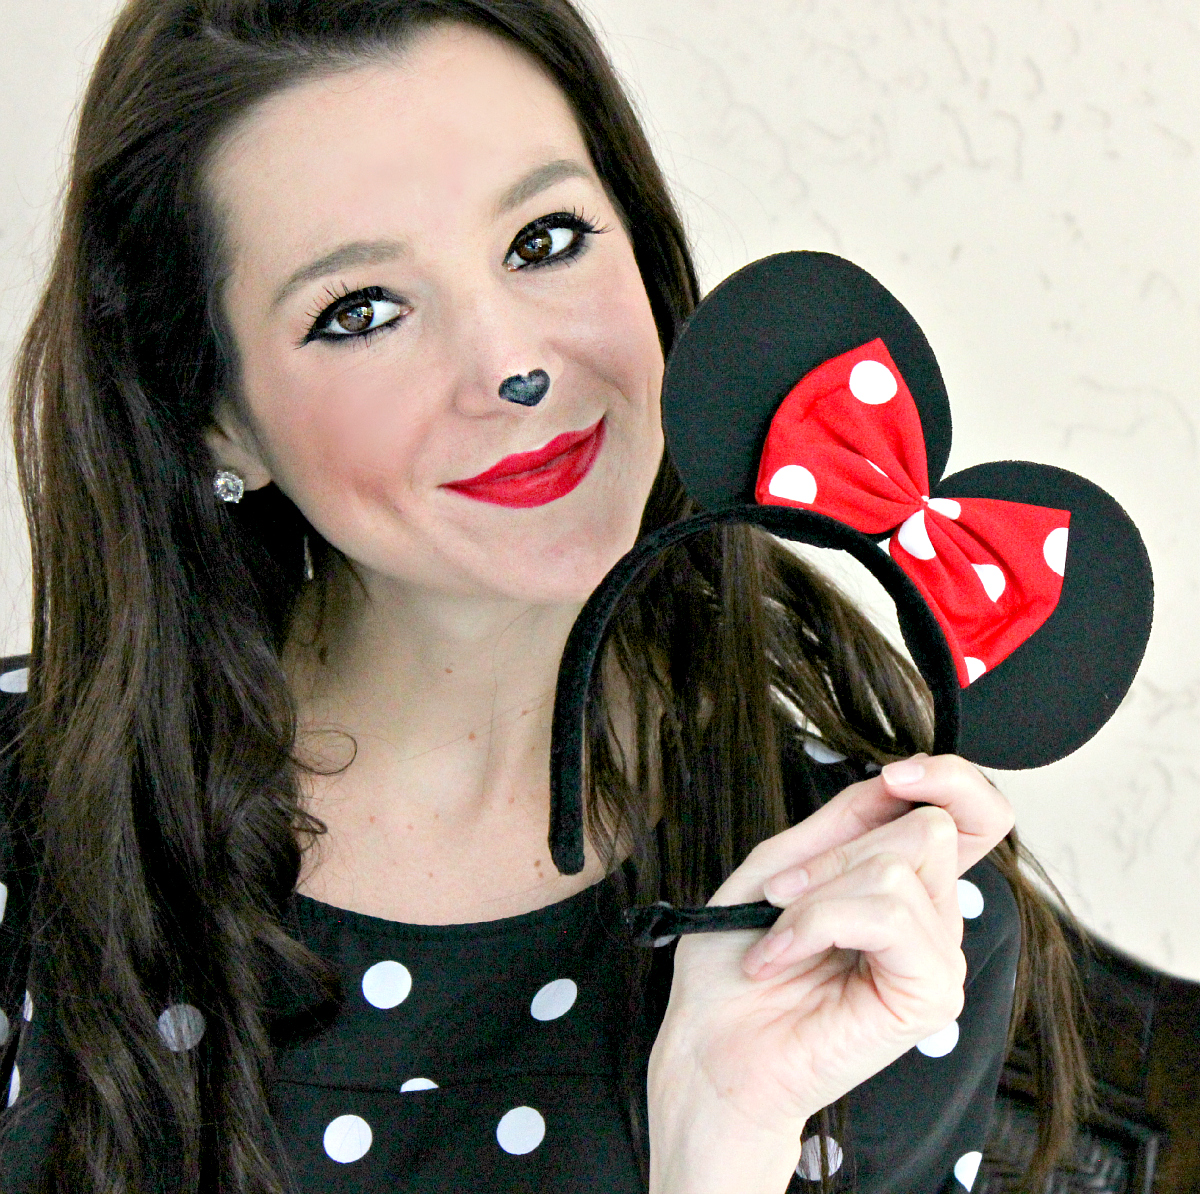 minnie mouse makeup easy